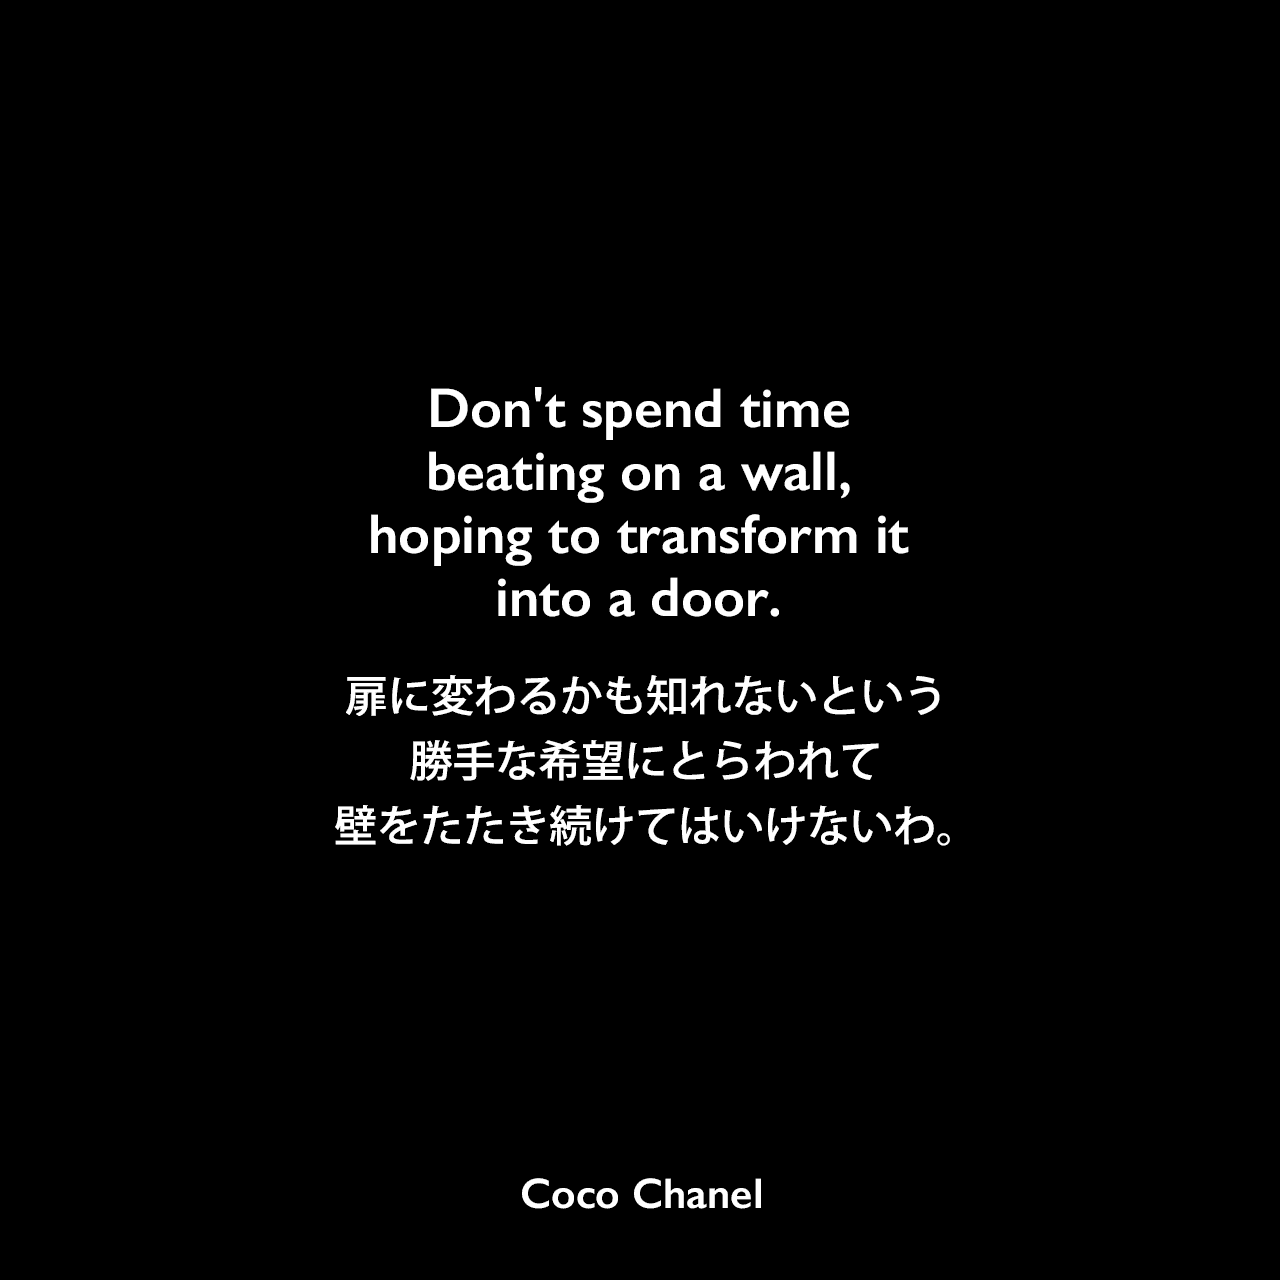 Don't spend time beating on a wall, hoping to transform it into a door.扉に変わるかも知れないという、勝手な希望にとらわれて、壁をたたき続けてはいけないわ。- ロバート・ロームの本「You've Got Style : Your Personal Guide for Relating to Others‎」よりCoco Chanel